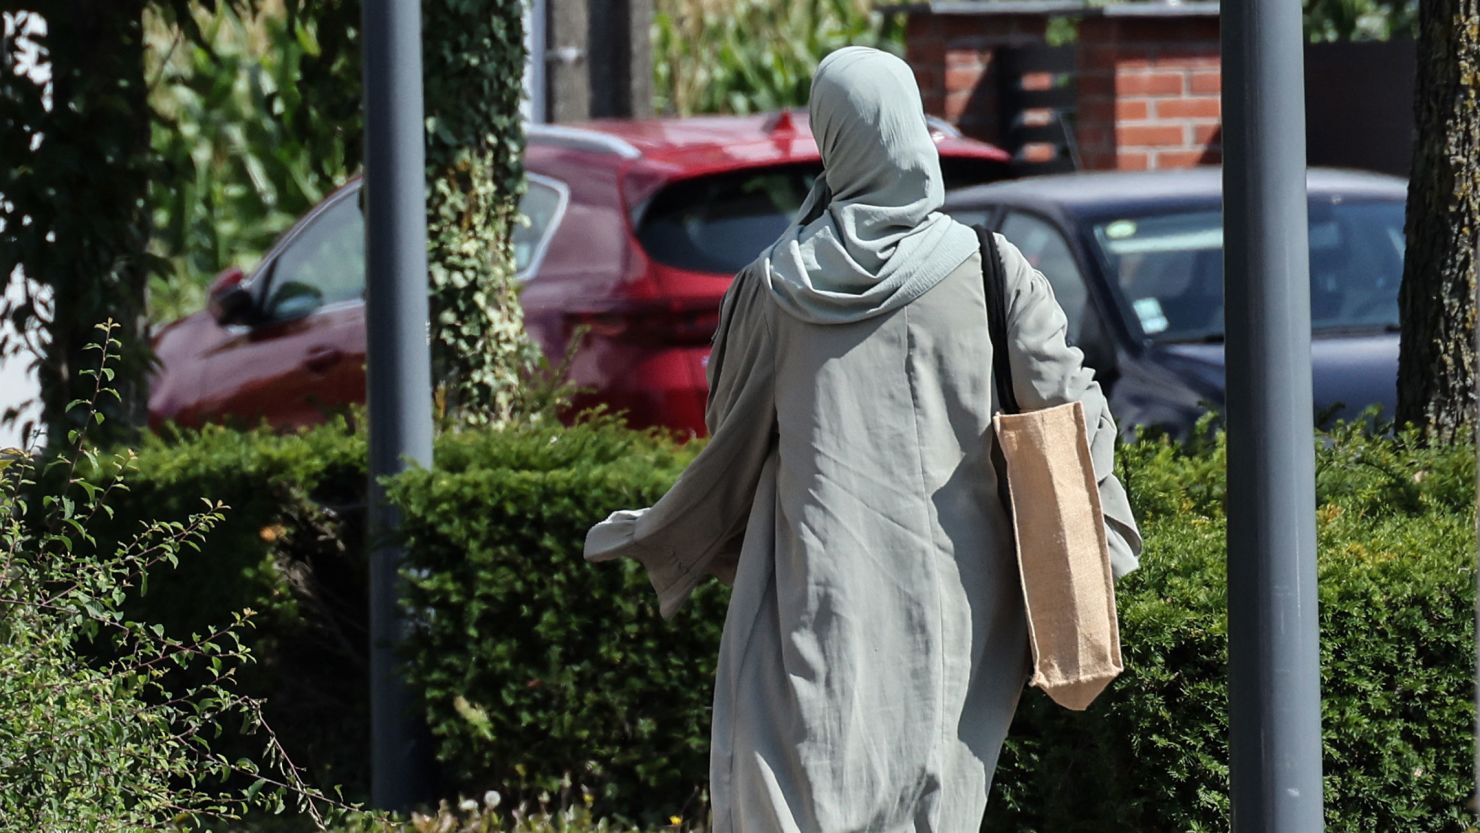 France has pursued a series of controversial bans and restrictions on items of customarily Islamic dress in recent years, which have frequently drawn the ire of Muslim countries and international rights groups.